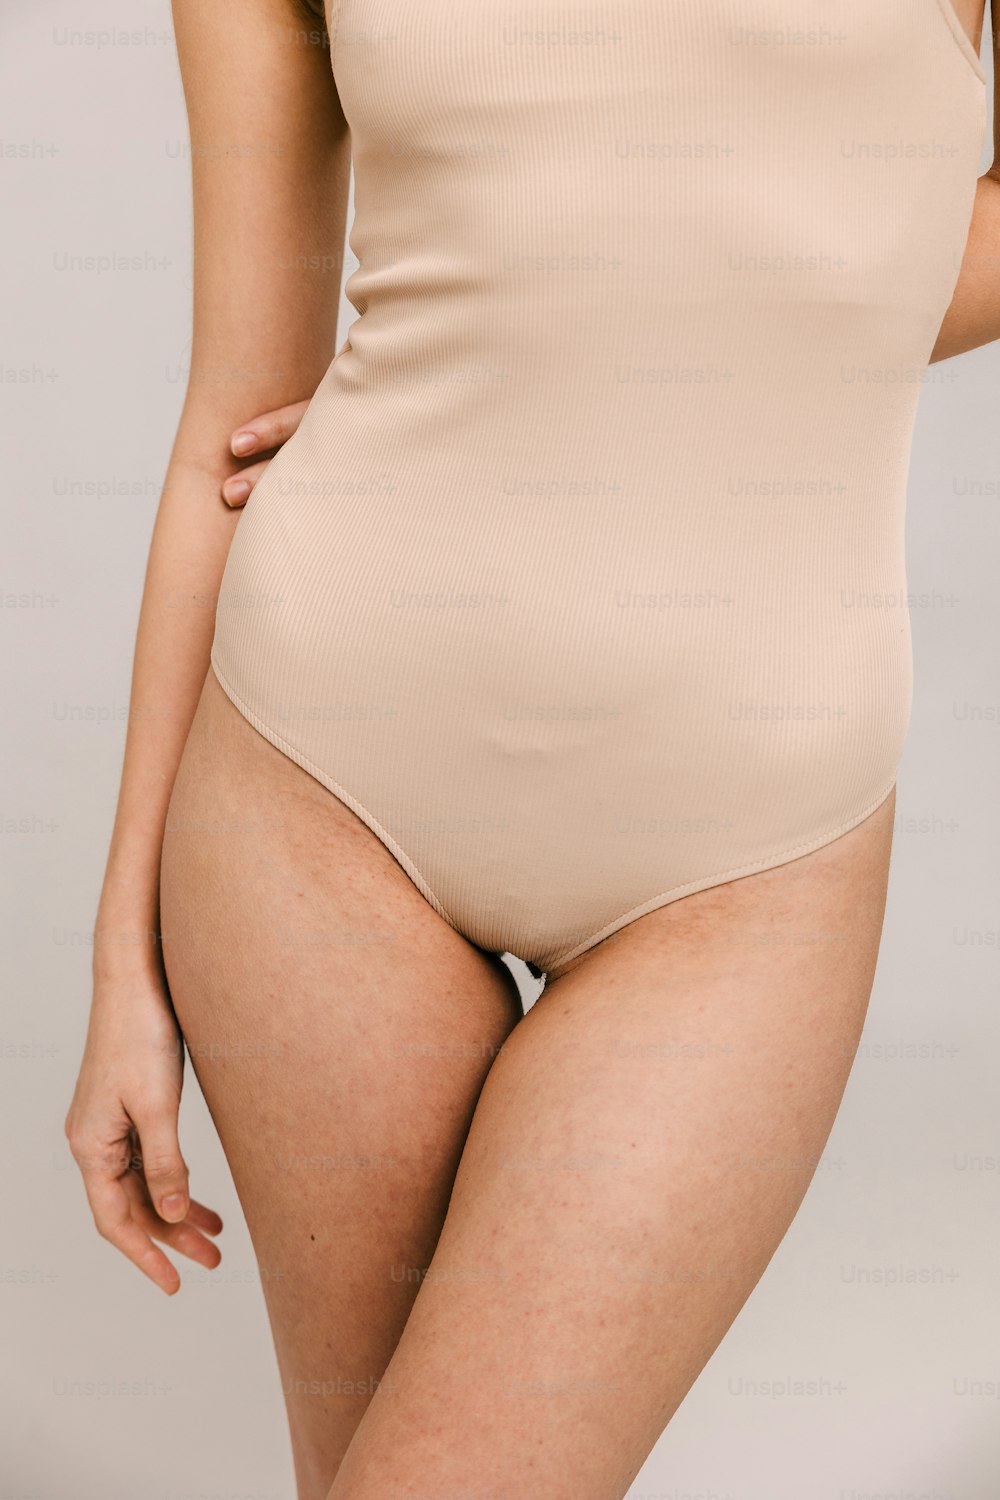 a woman in a tan bodysuit posing for the camera